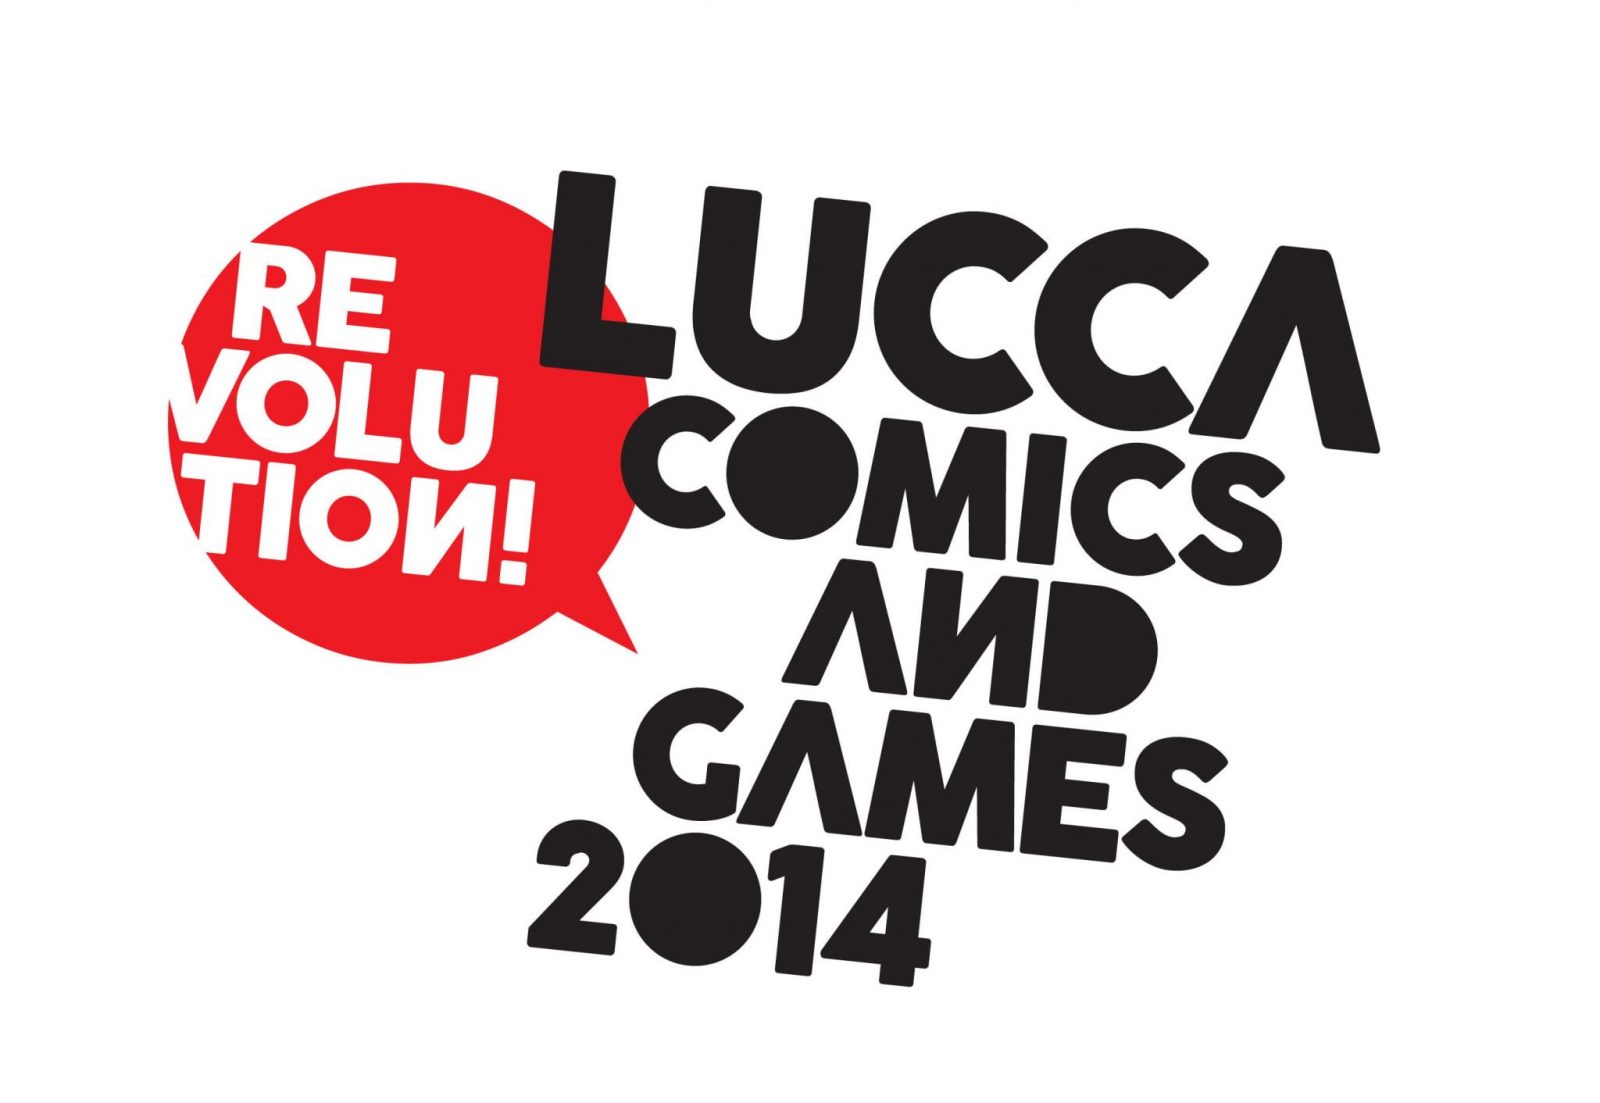 The Game Championship al LuccaComics&Games 1